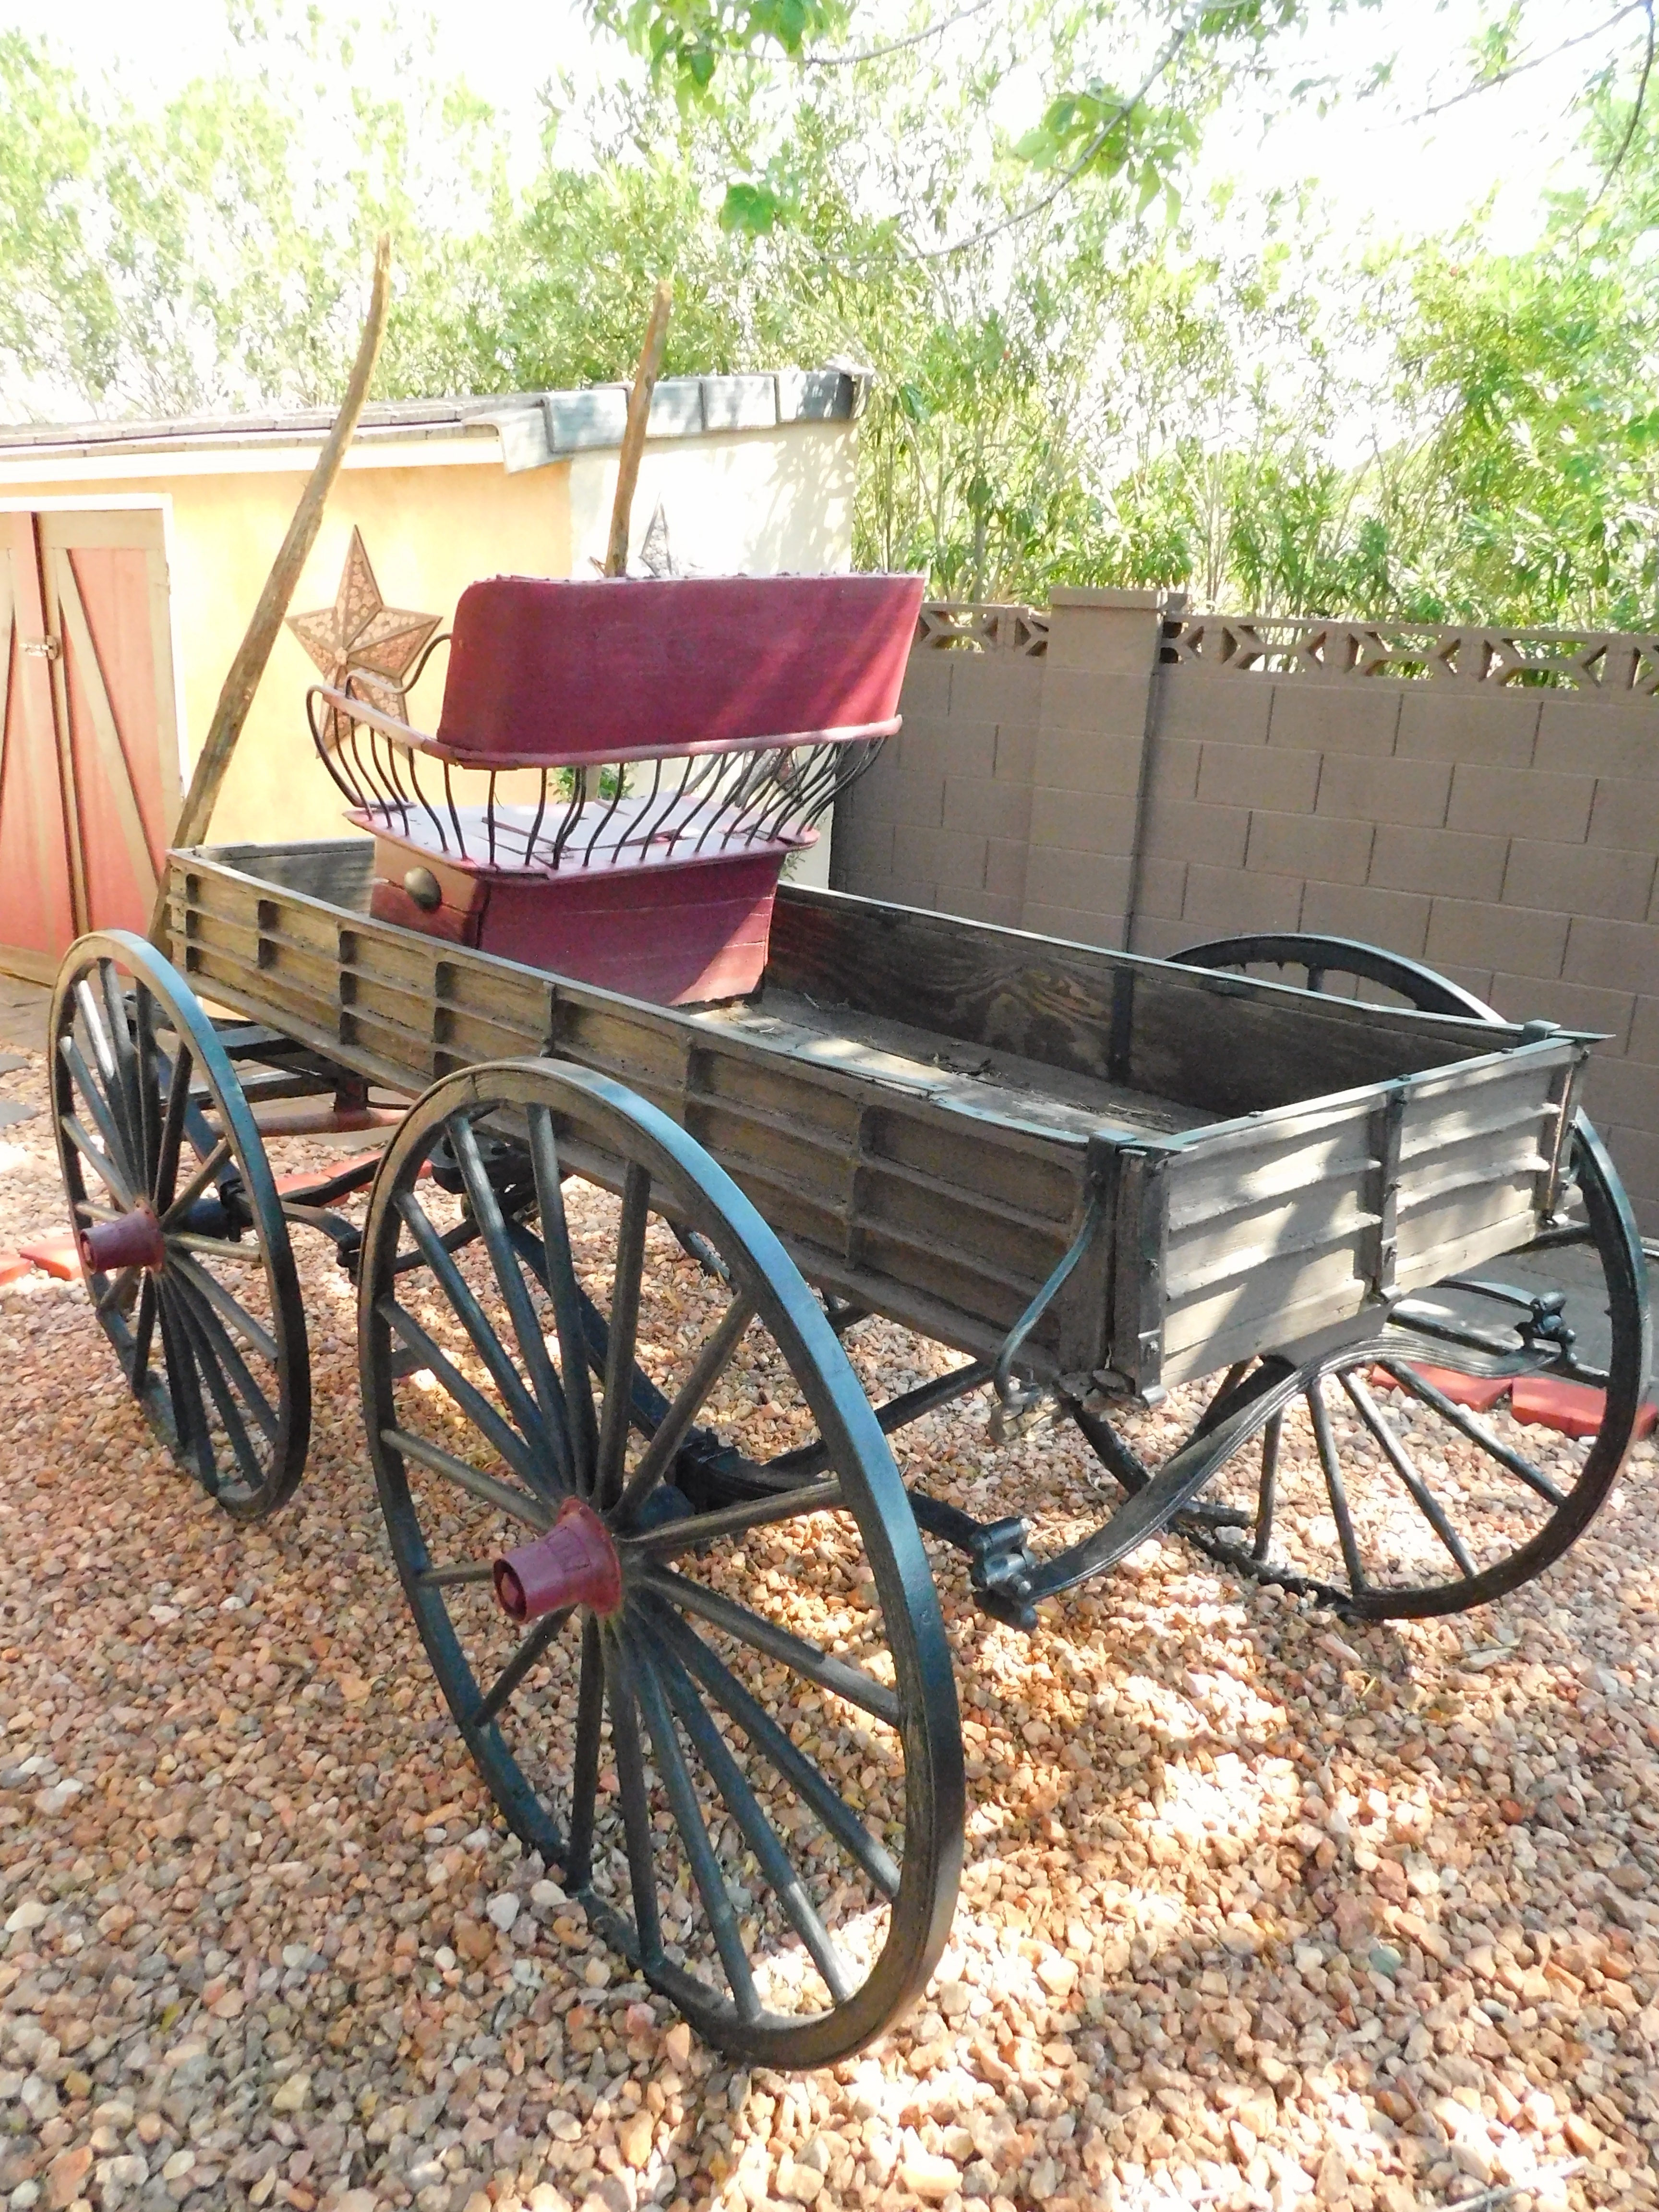 An old wagon, somewhat restored and upgraded